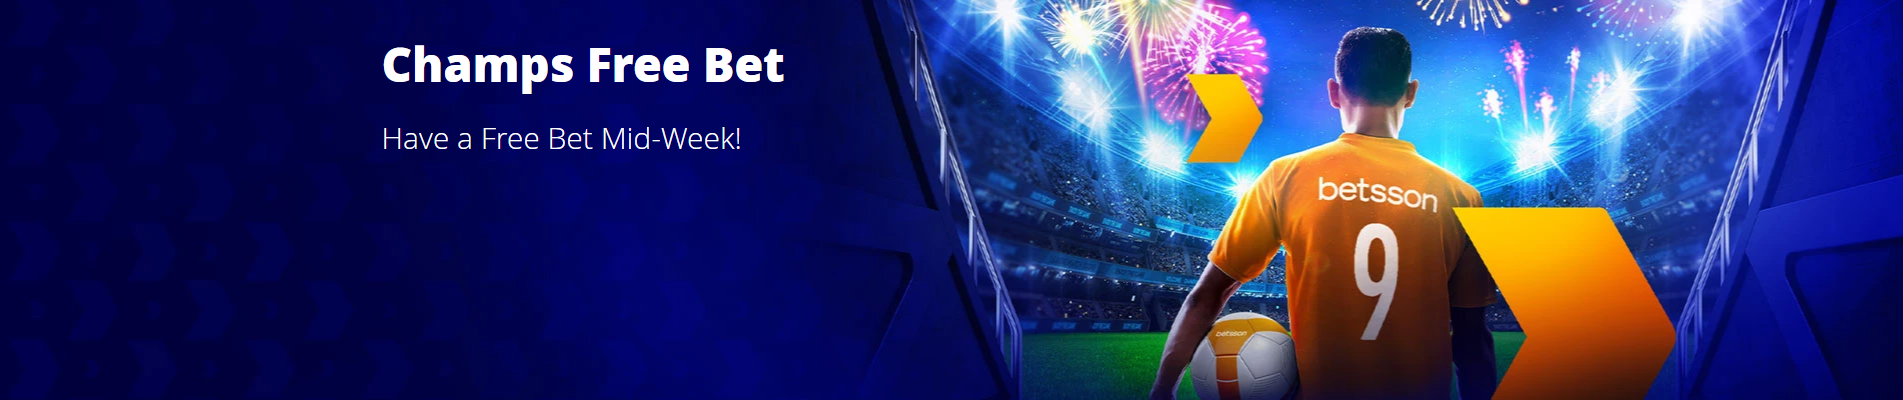 bookmaker betsson champs free bet offer